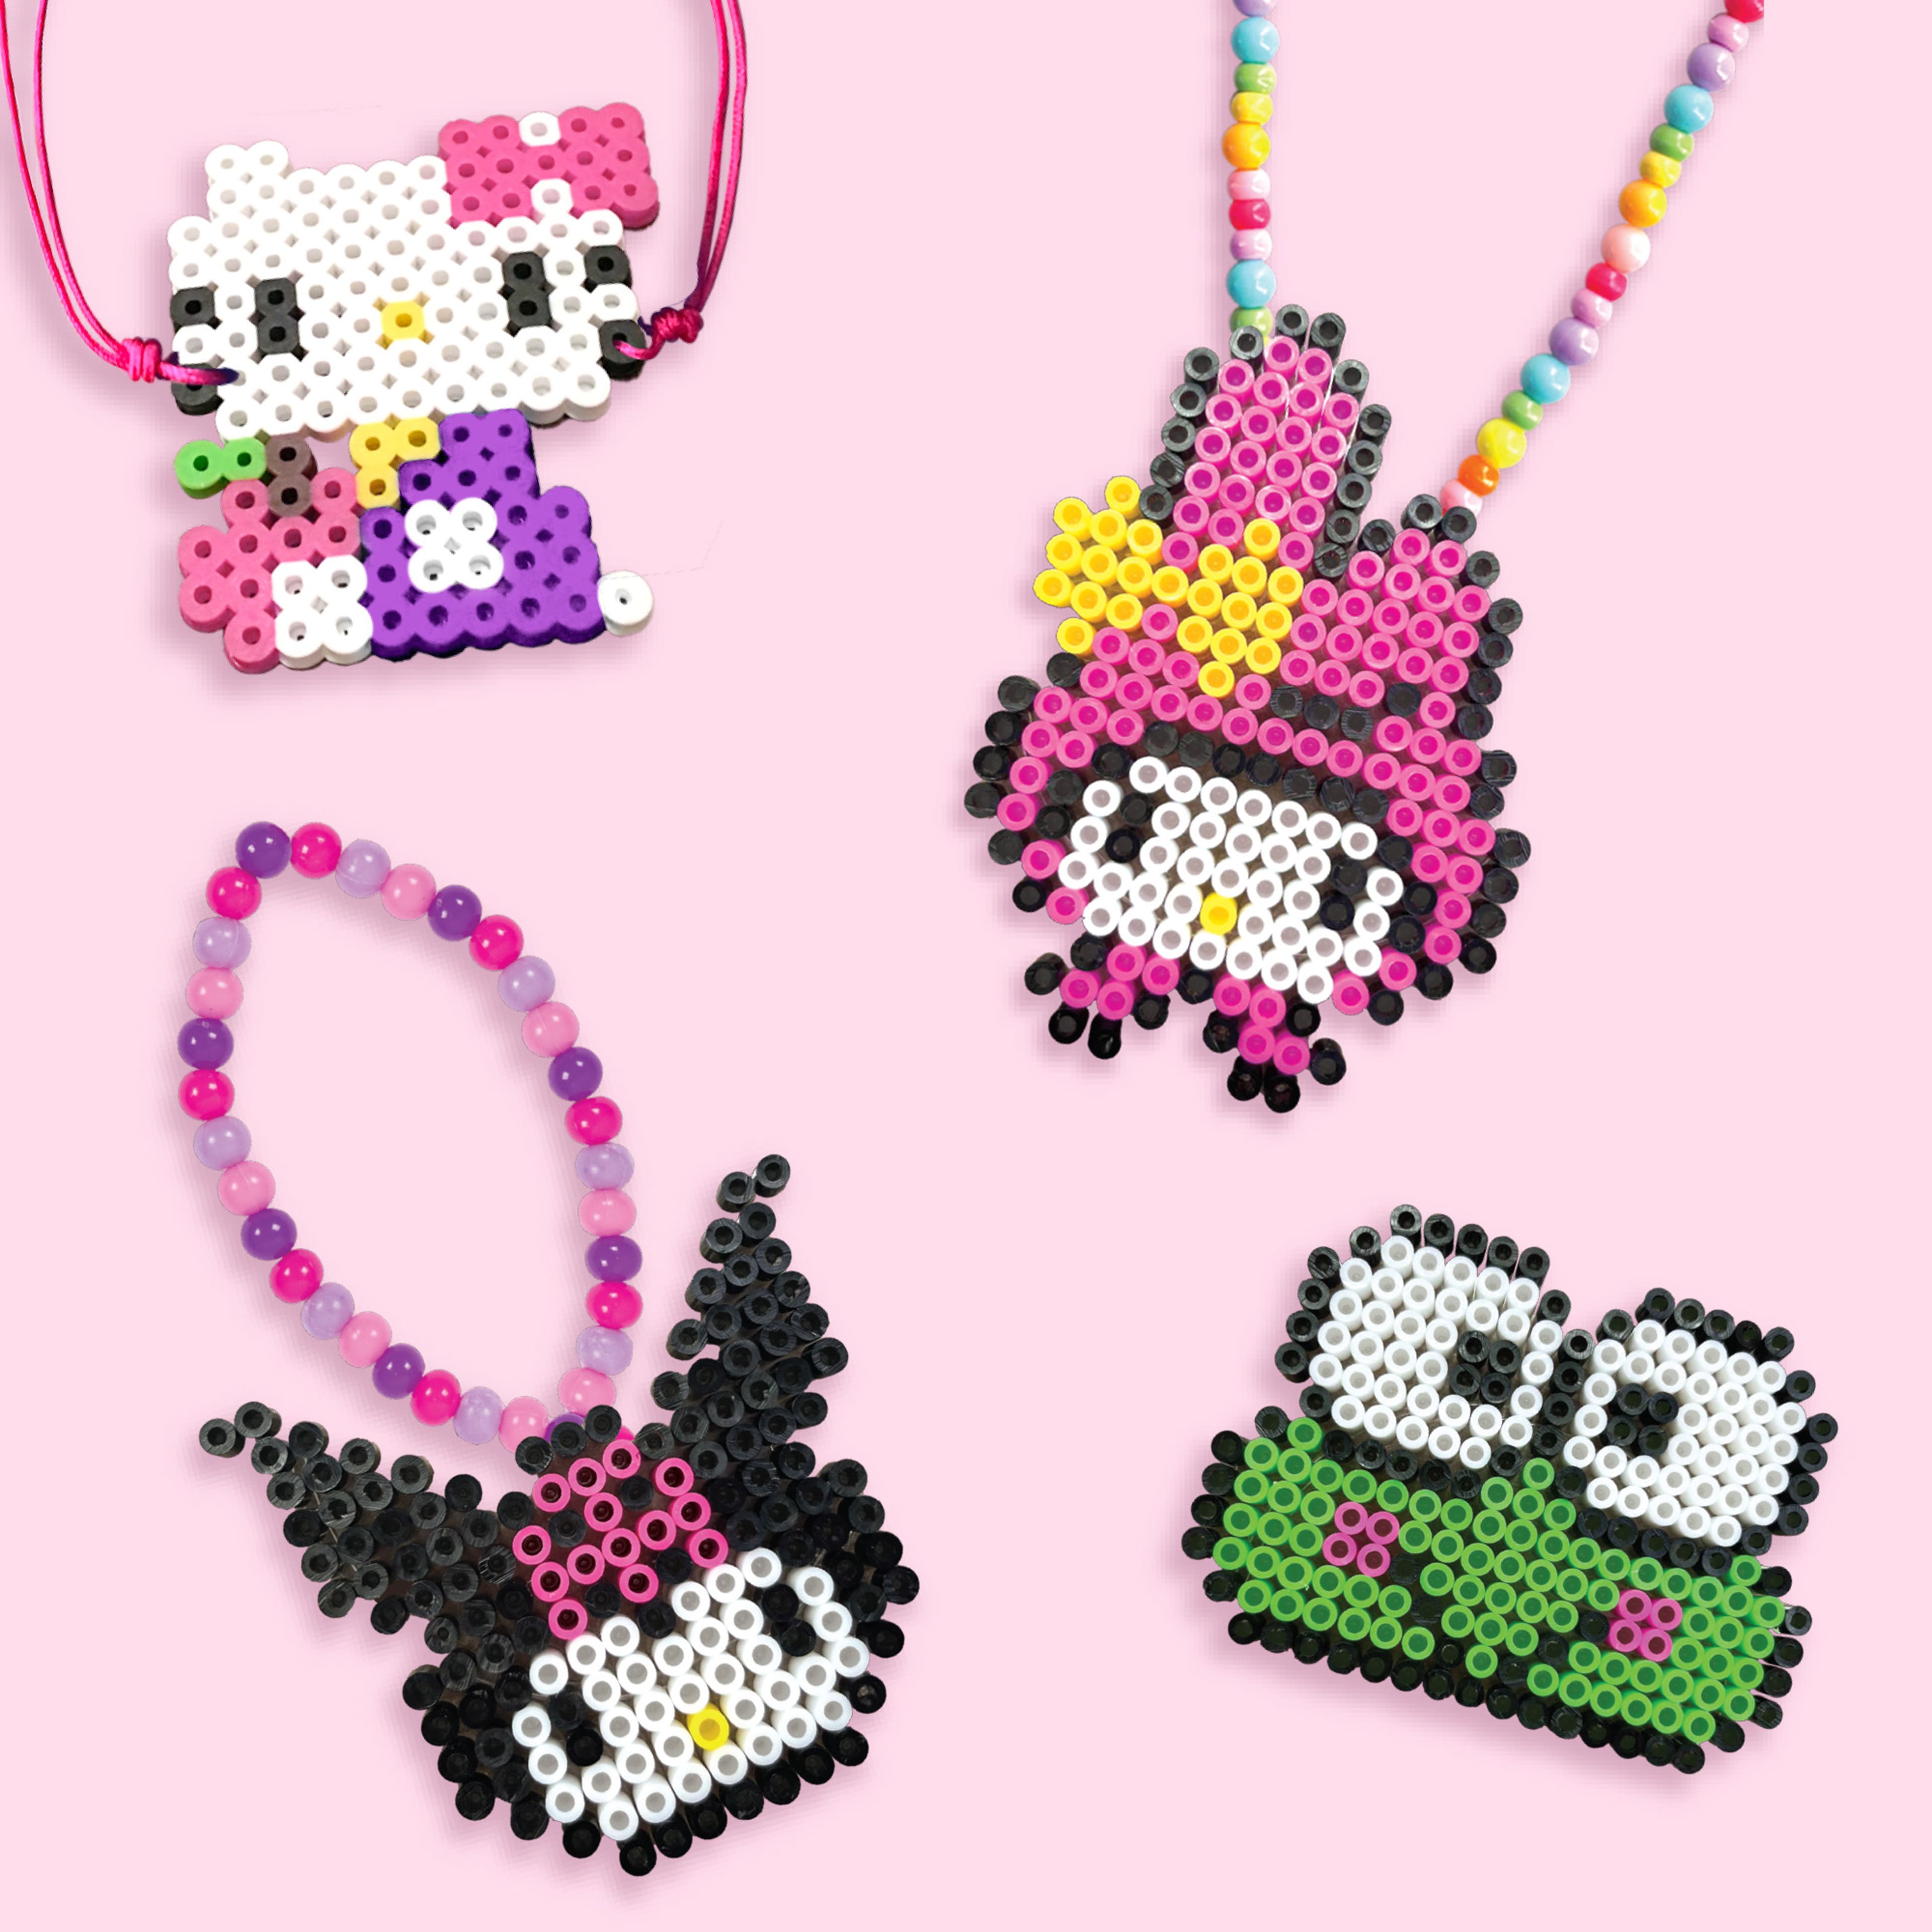 Hello Kitty Frame 5 by 7 using Regular Perler Beads for Sale in Los